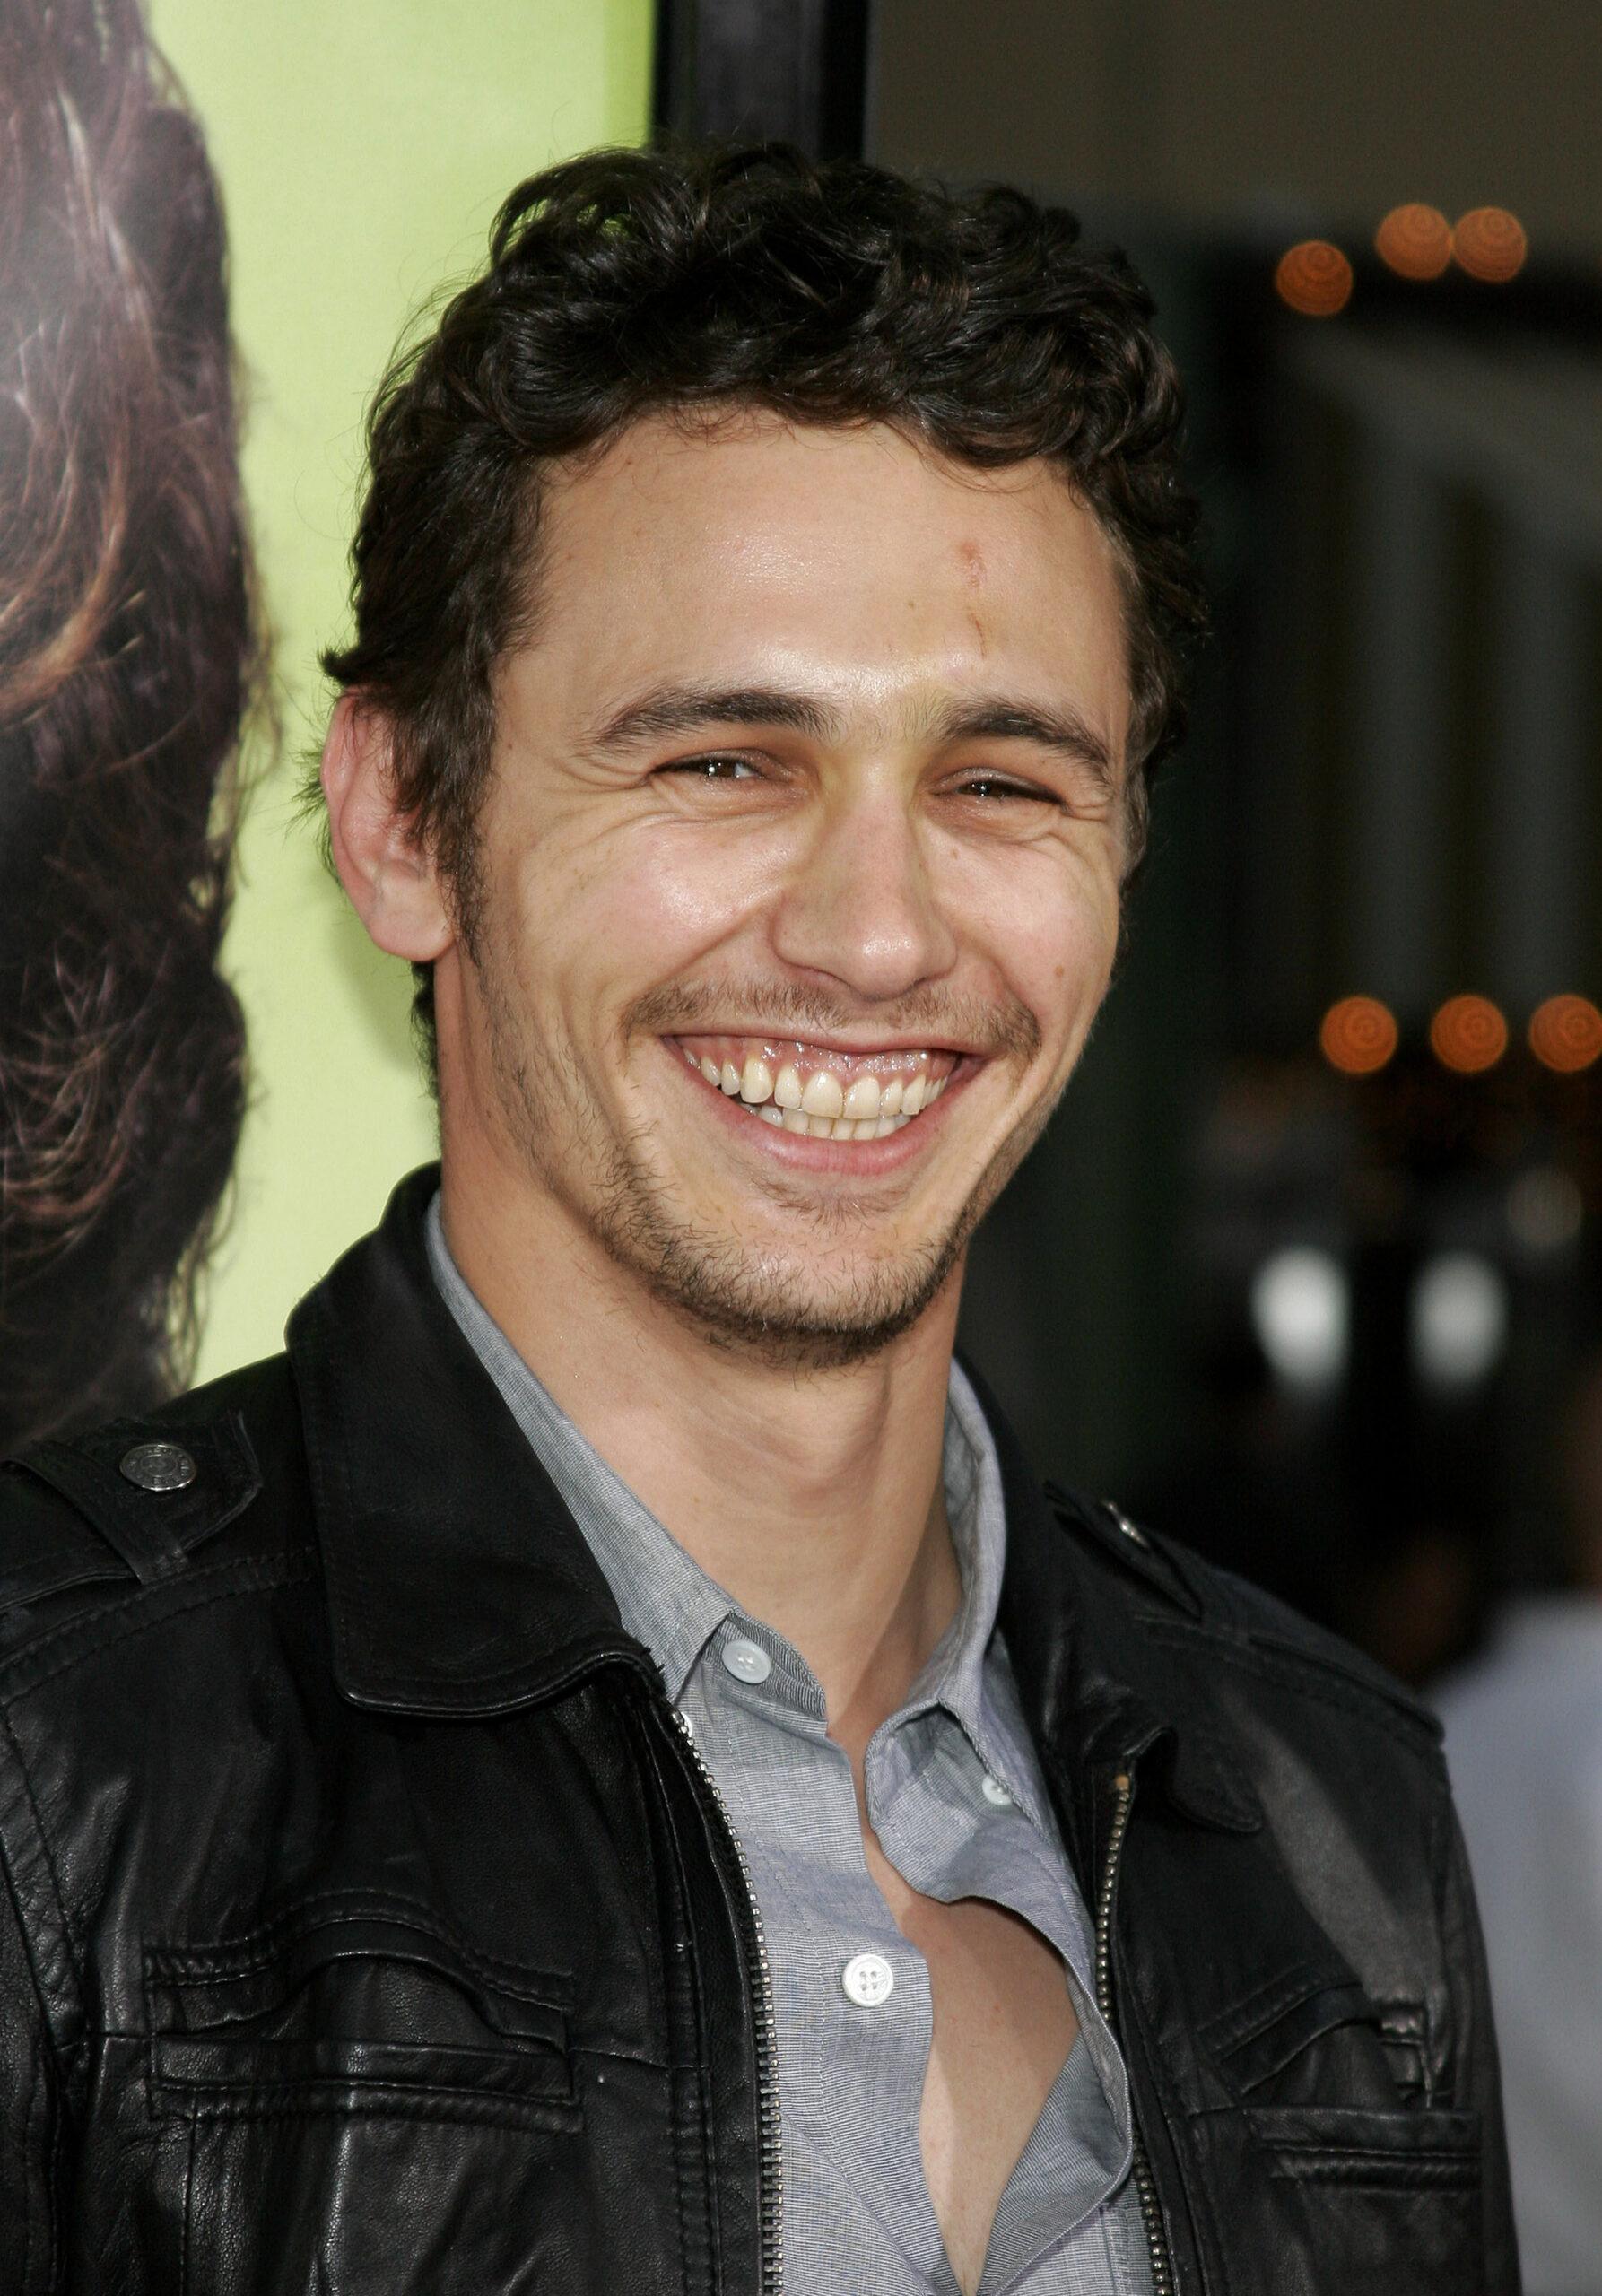 Los Angeles Premiere of "Knocked Up"